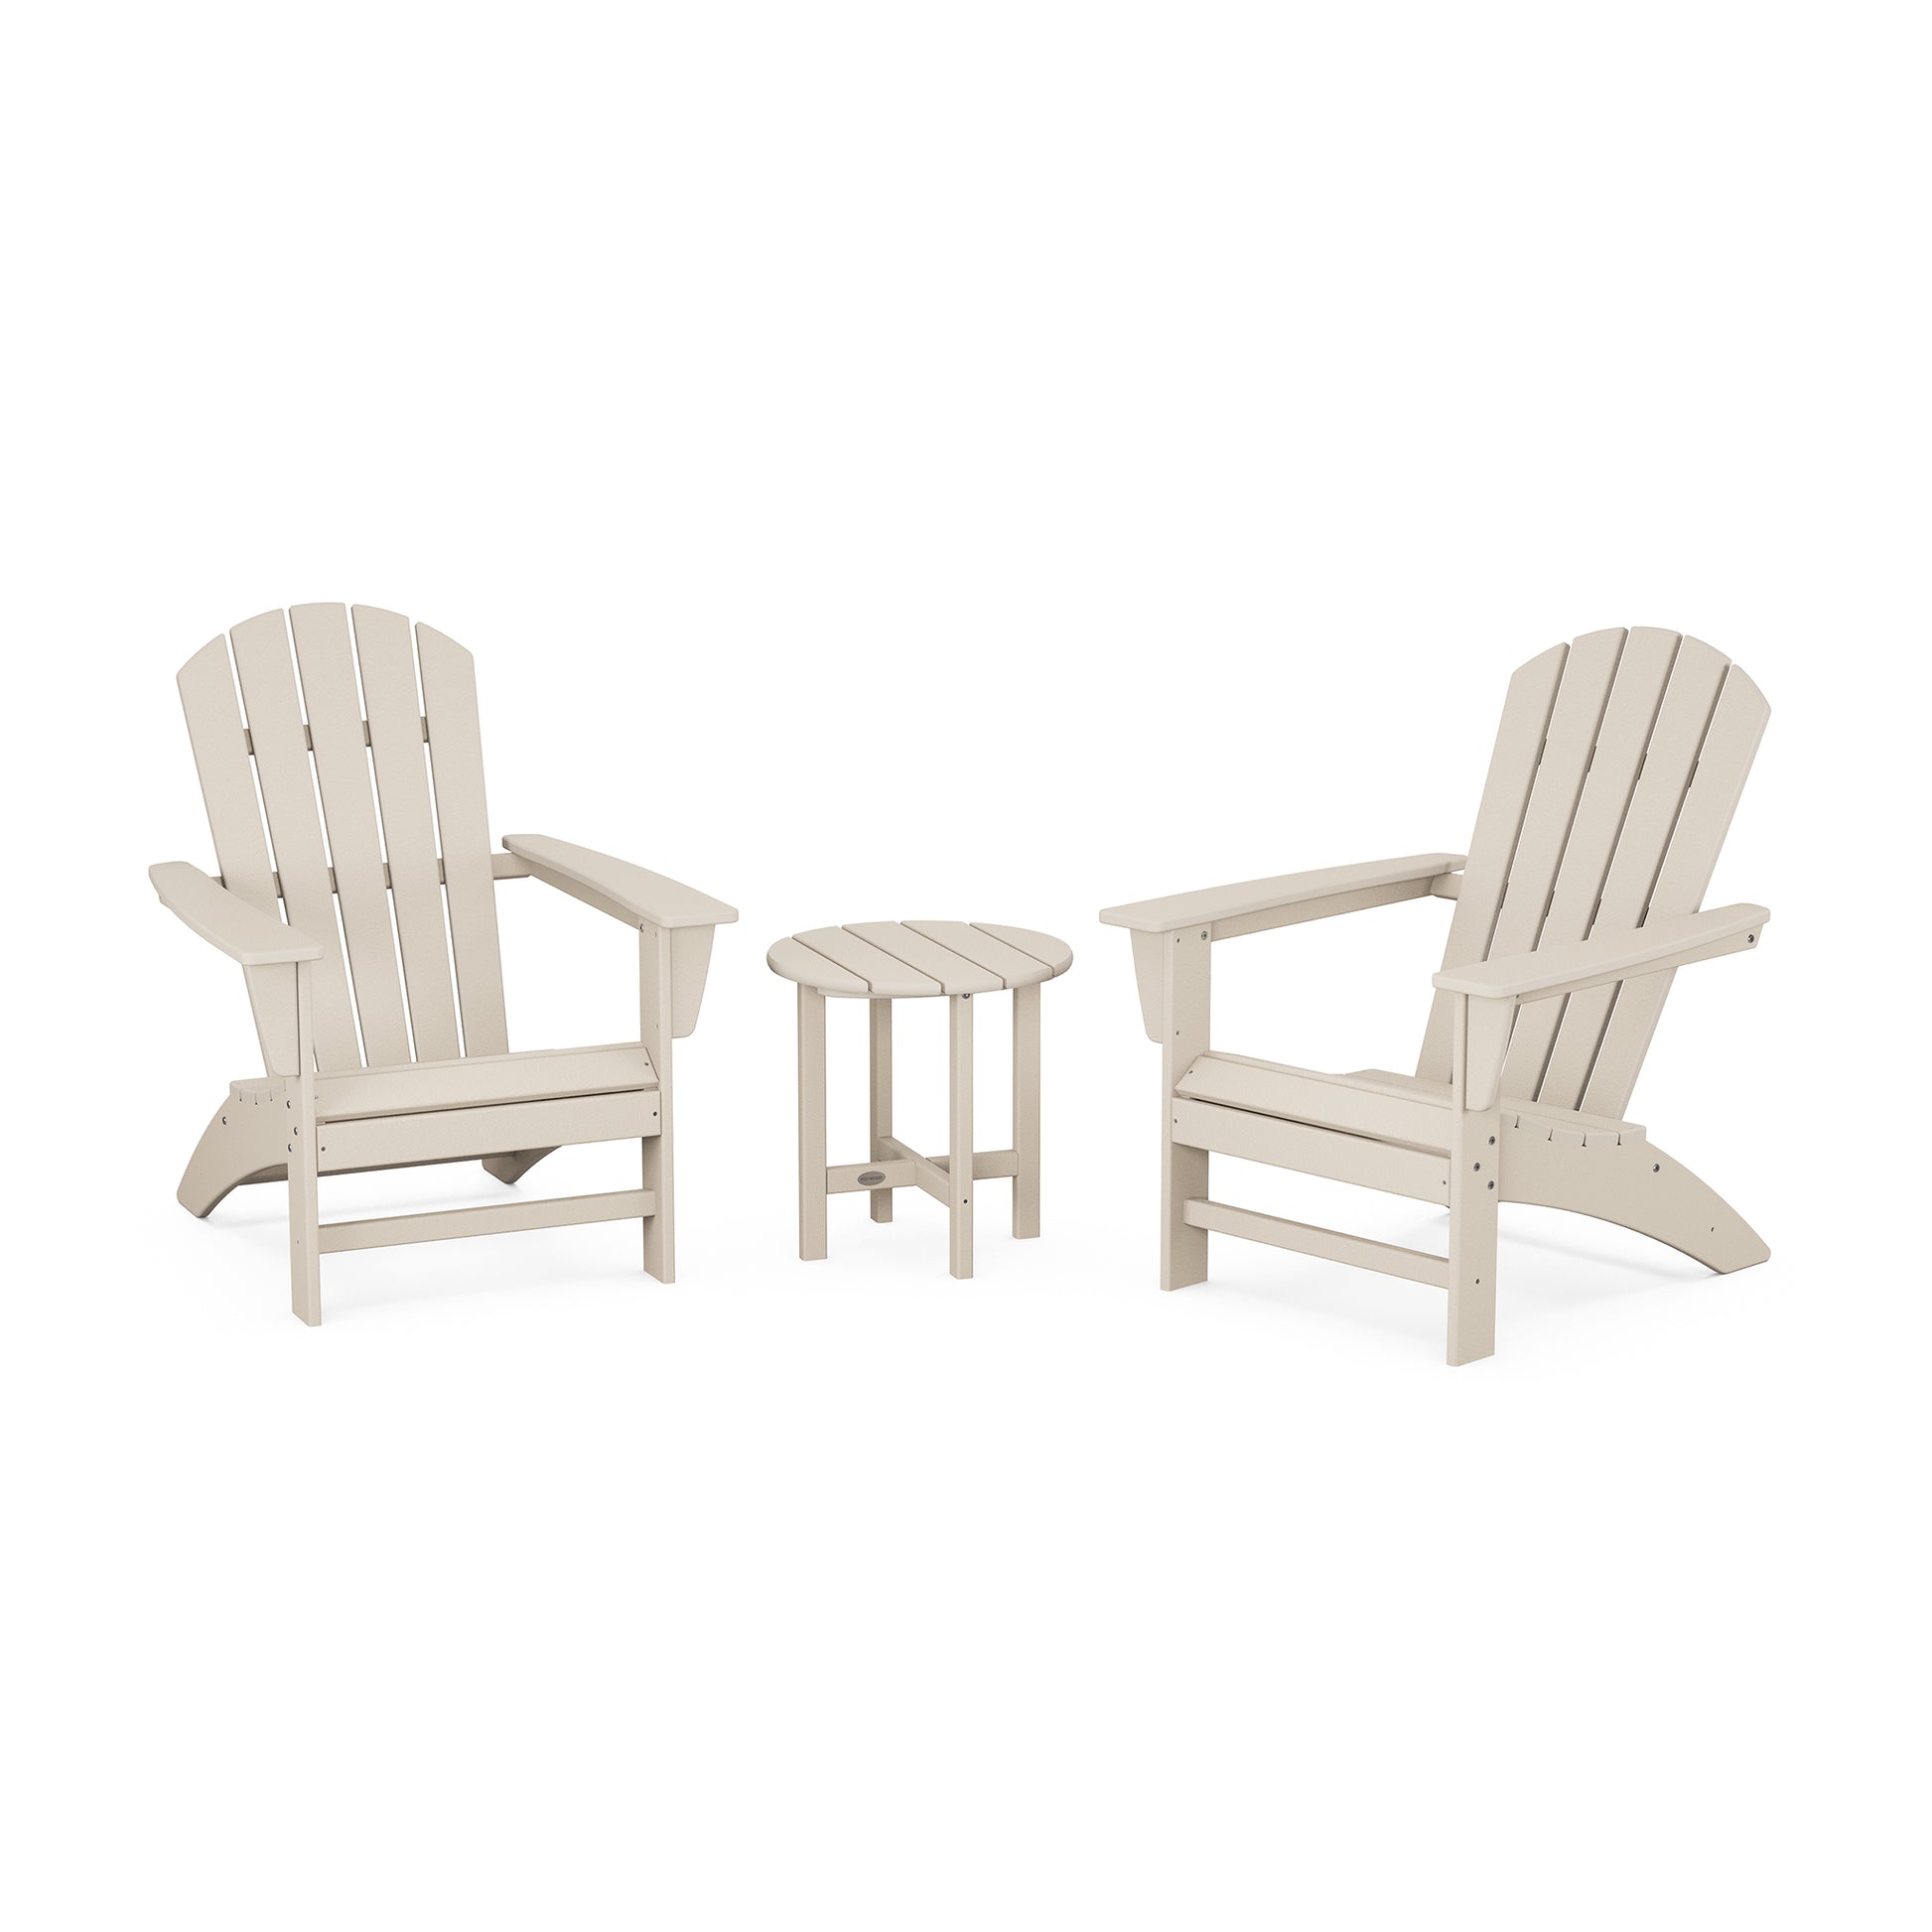 Two beige POLYWOOD Nautical 3-Piece Adirondack Sets with a small matching side table between them, displayed on a white background. The furniture design features slatted backs and seats with sturdy armrests.